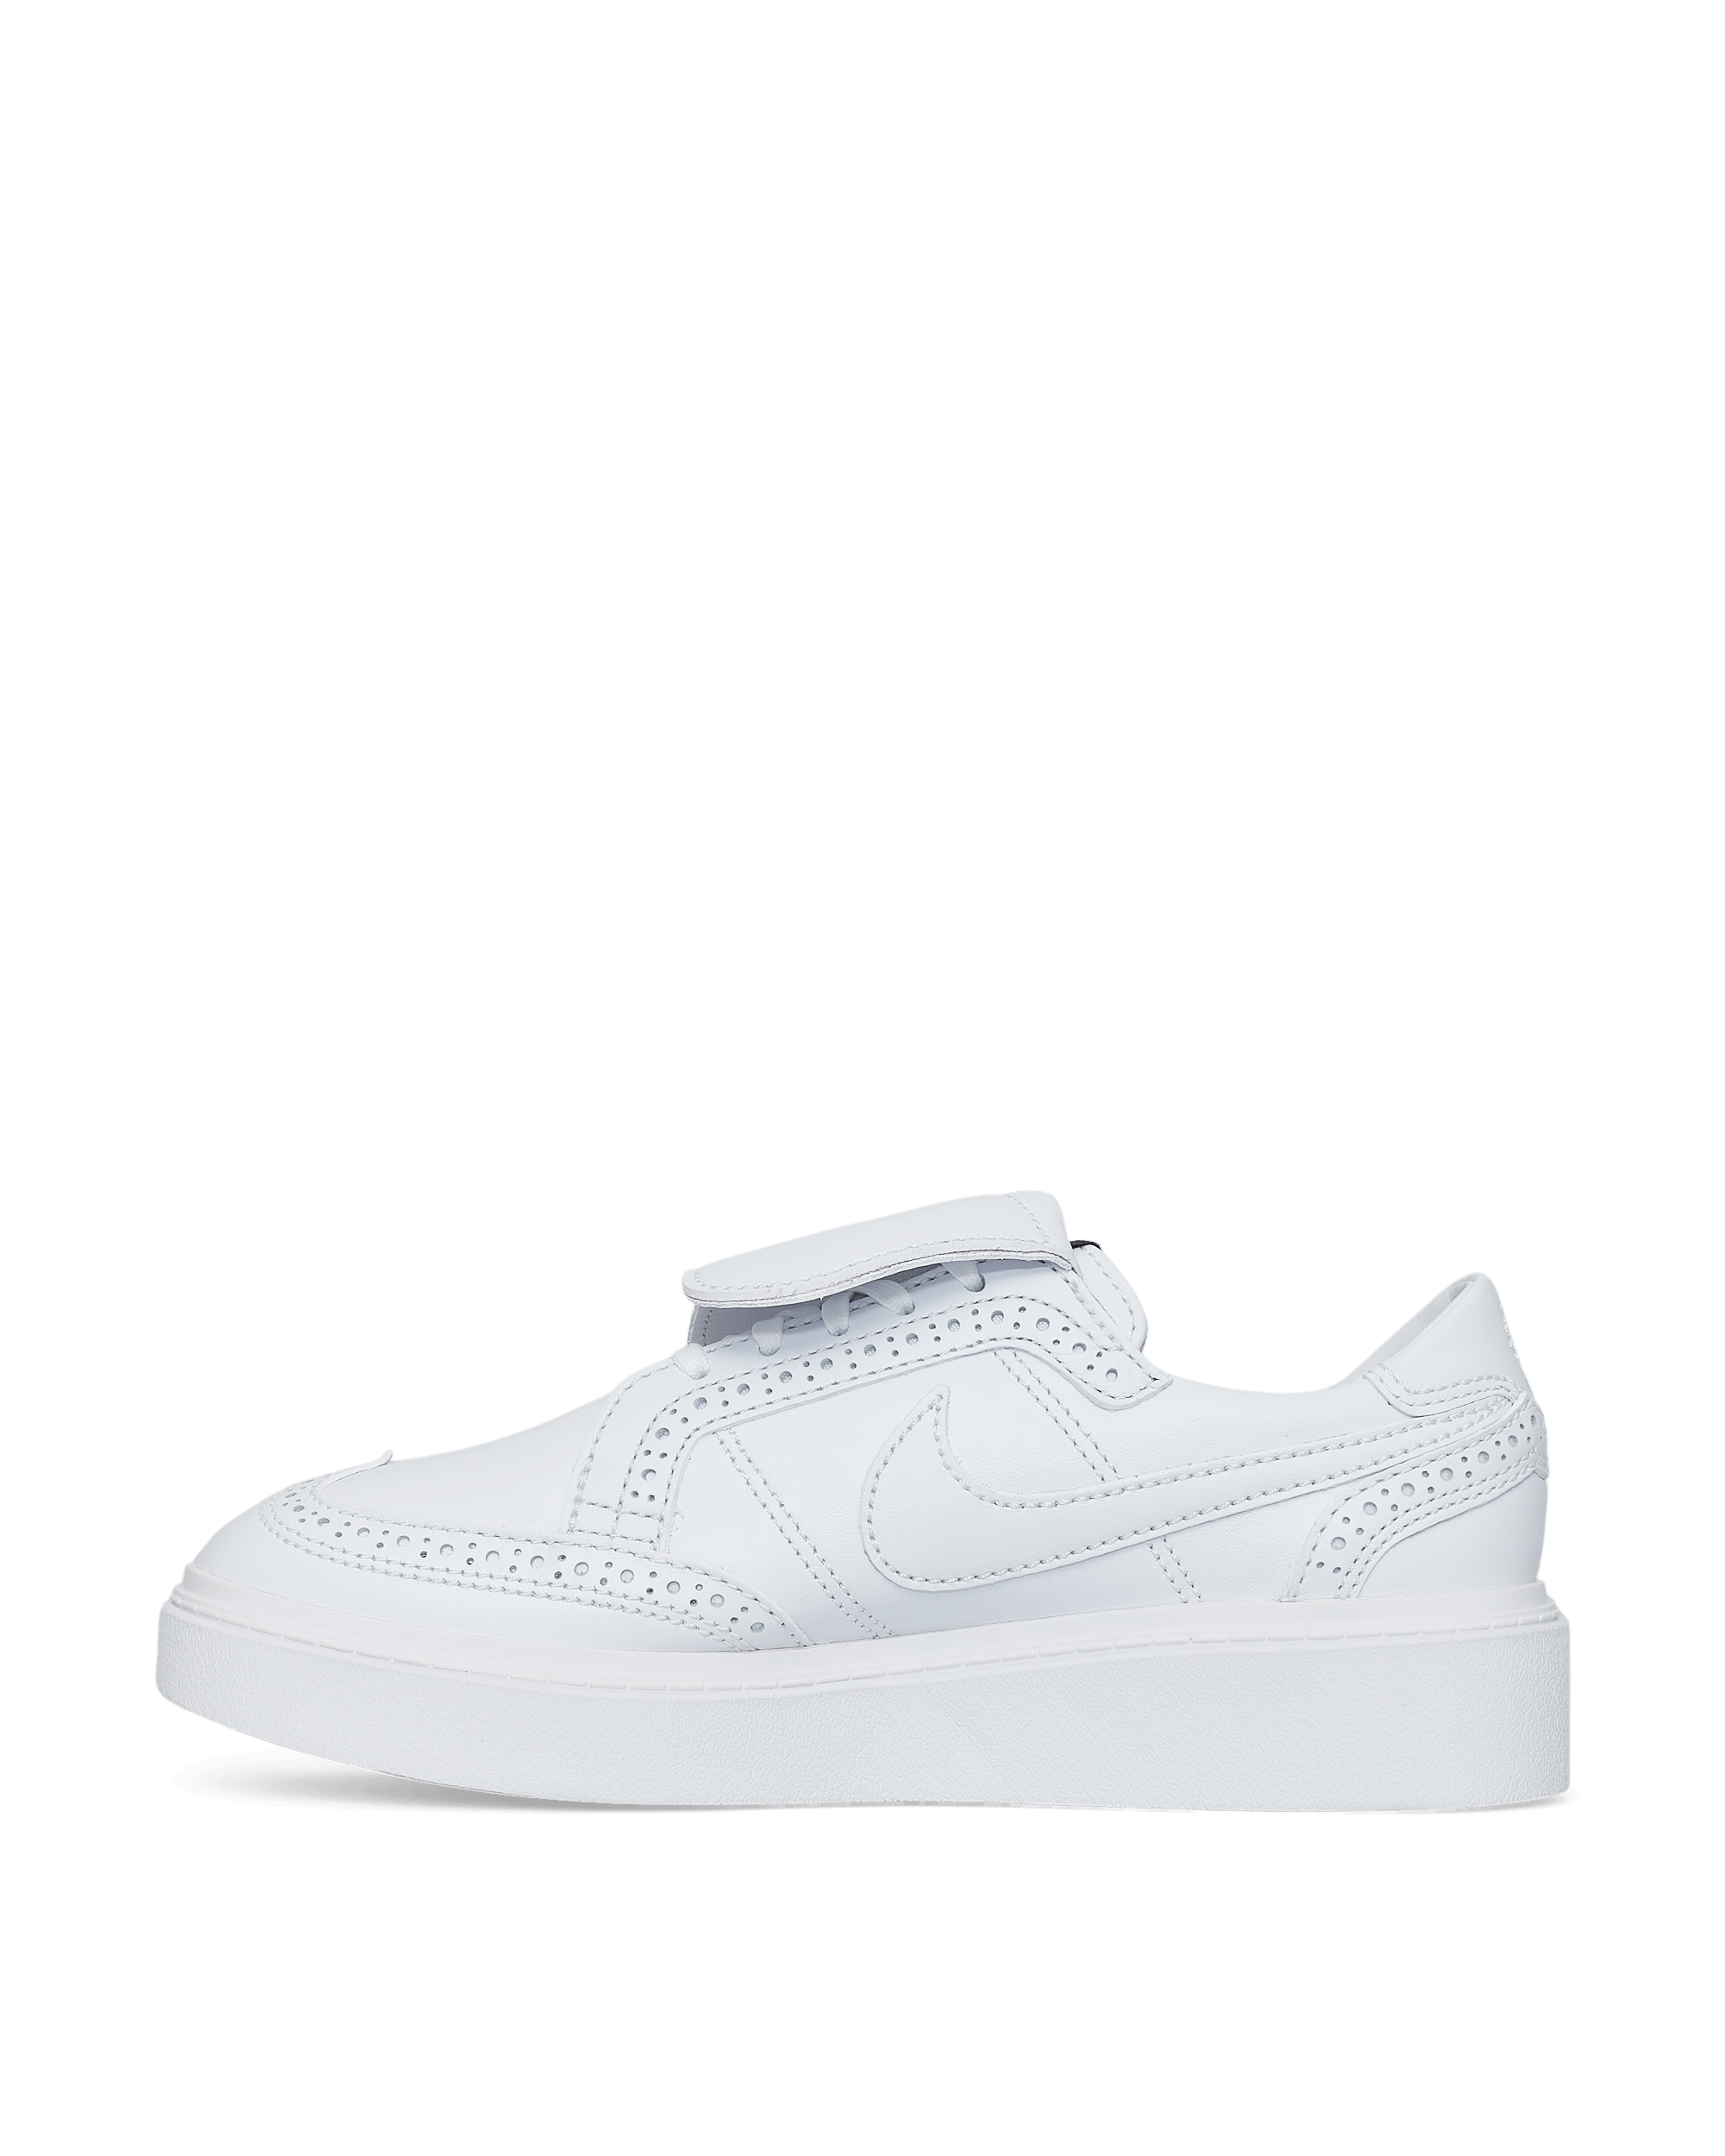 Nike Special Project Kwondo1 / Peaceminusone White/White Sneakers Low DH2482-100